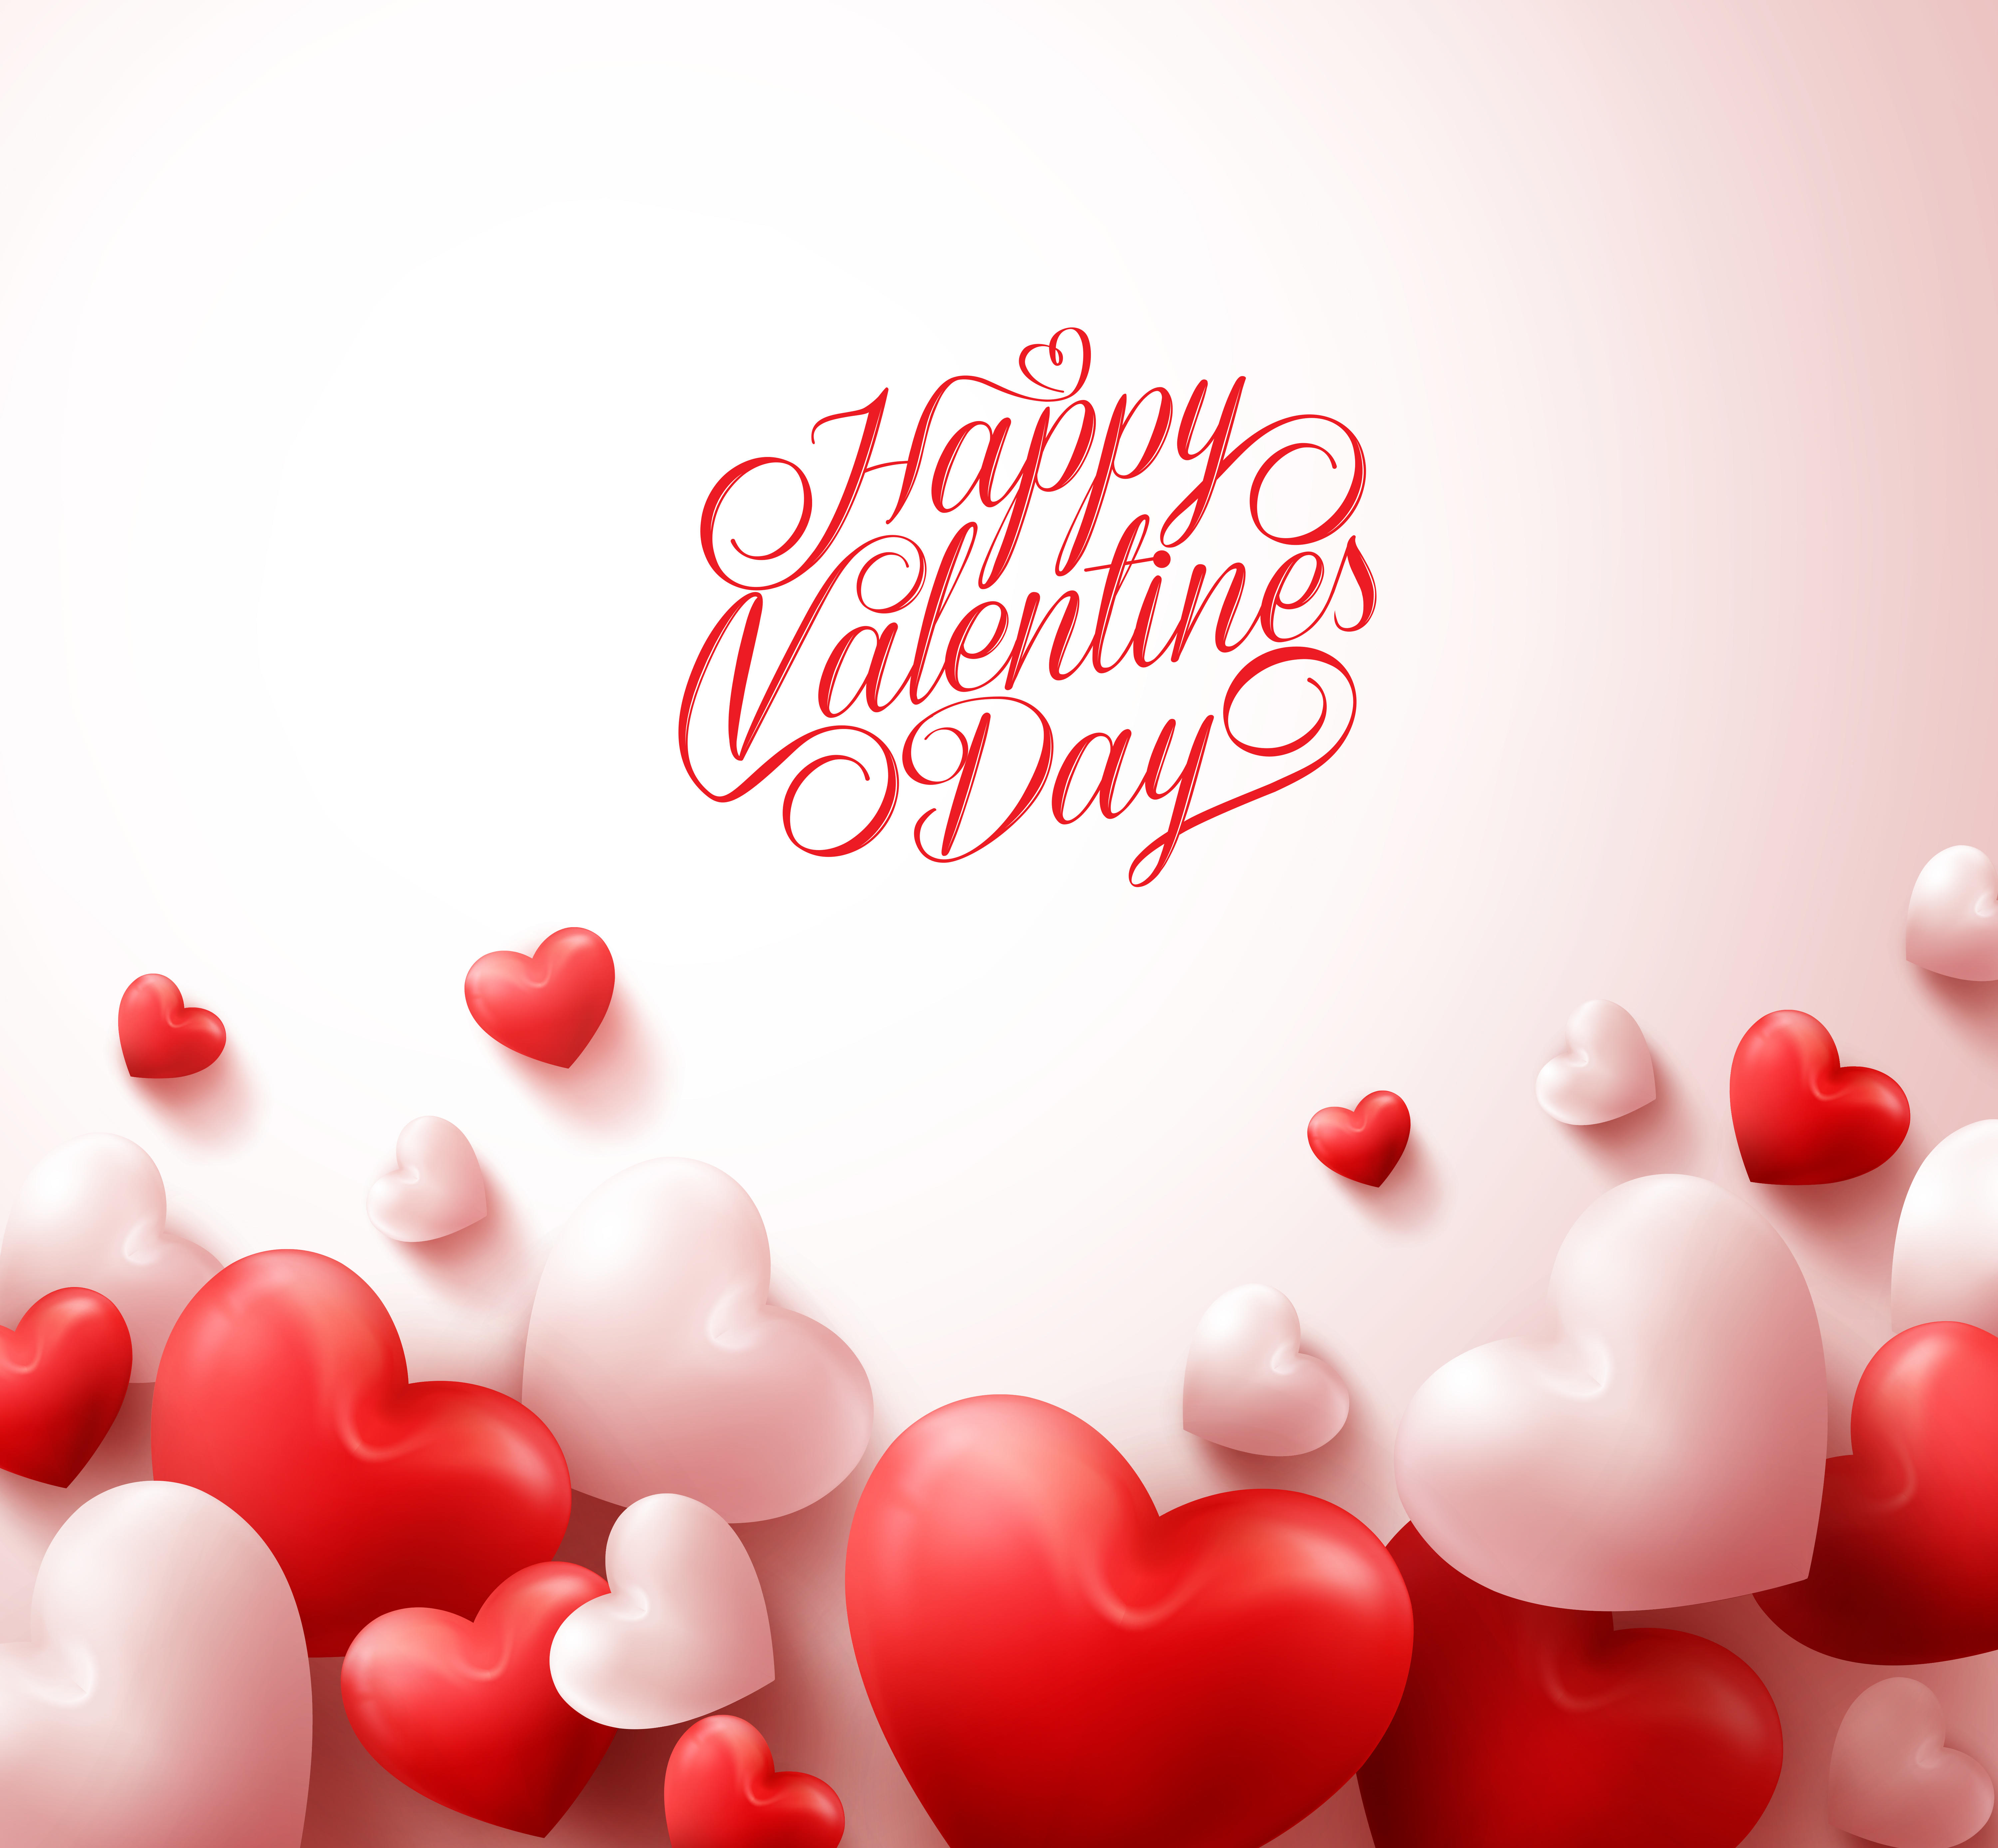 Wallpapers valentines hearts text on the desktop